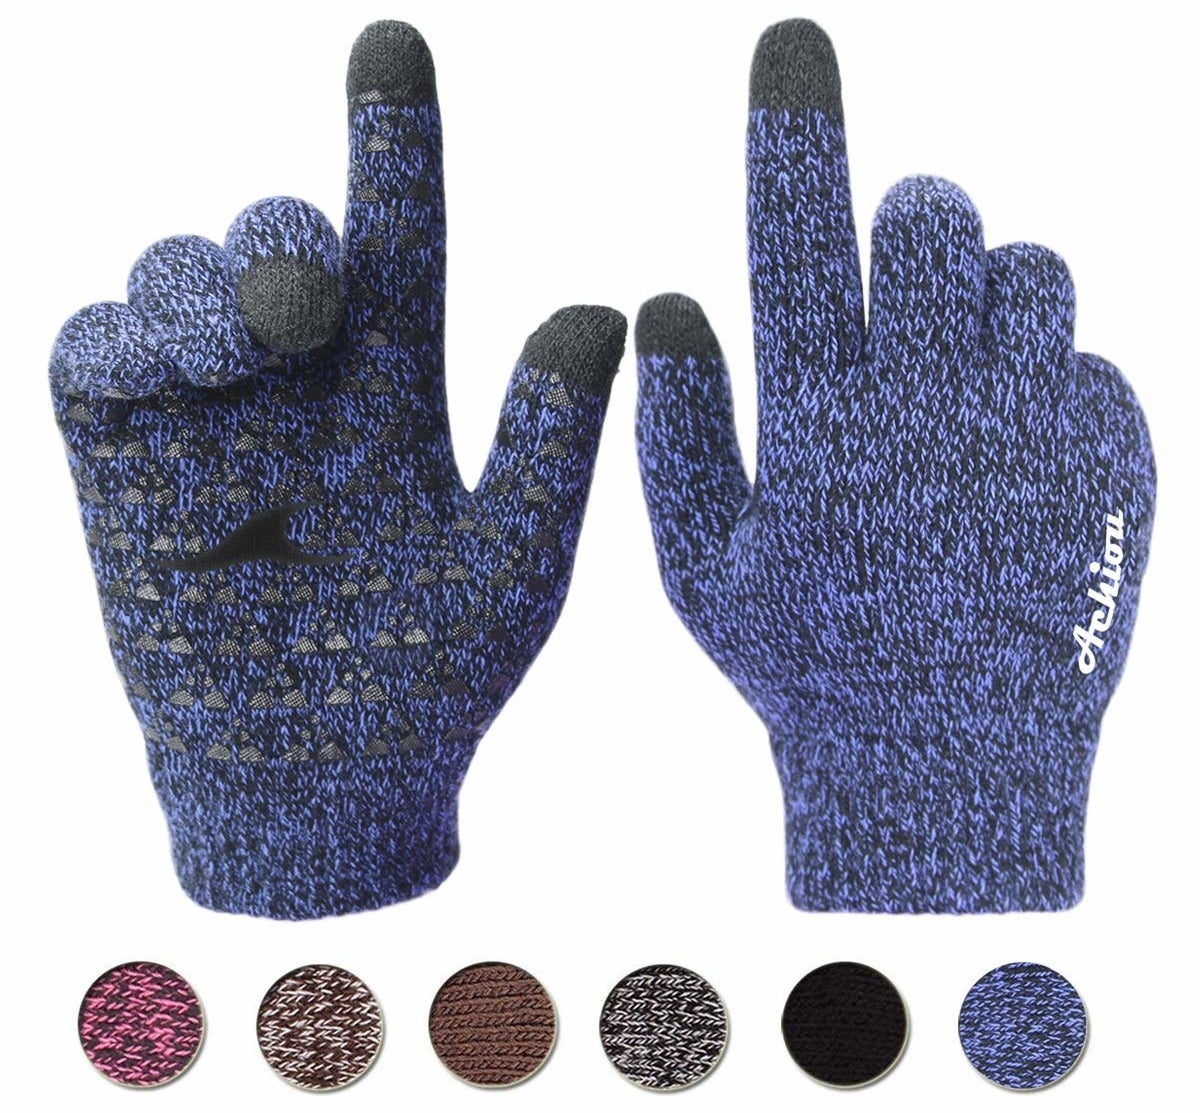 The gloves and some color swatches showing available colors